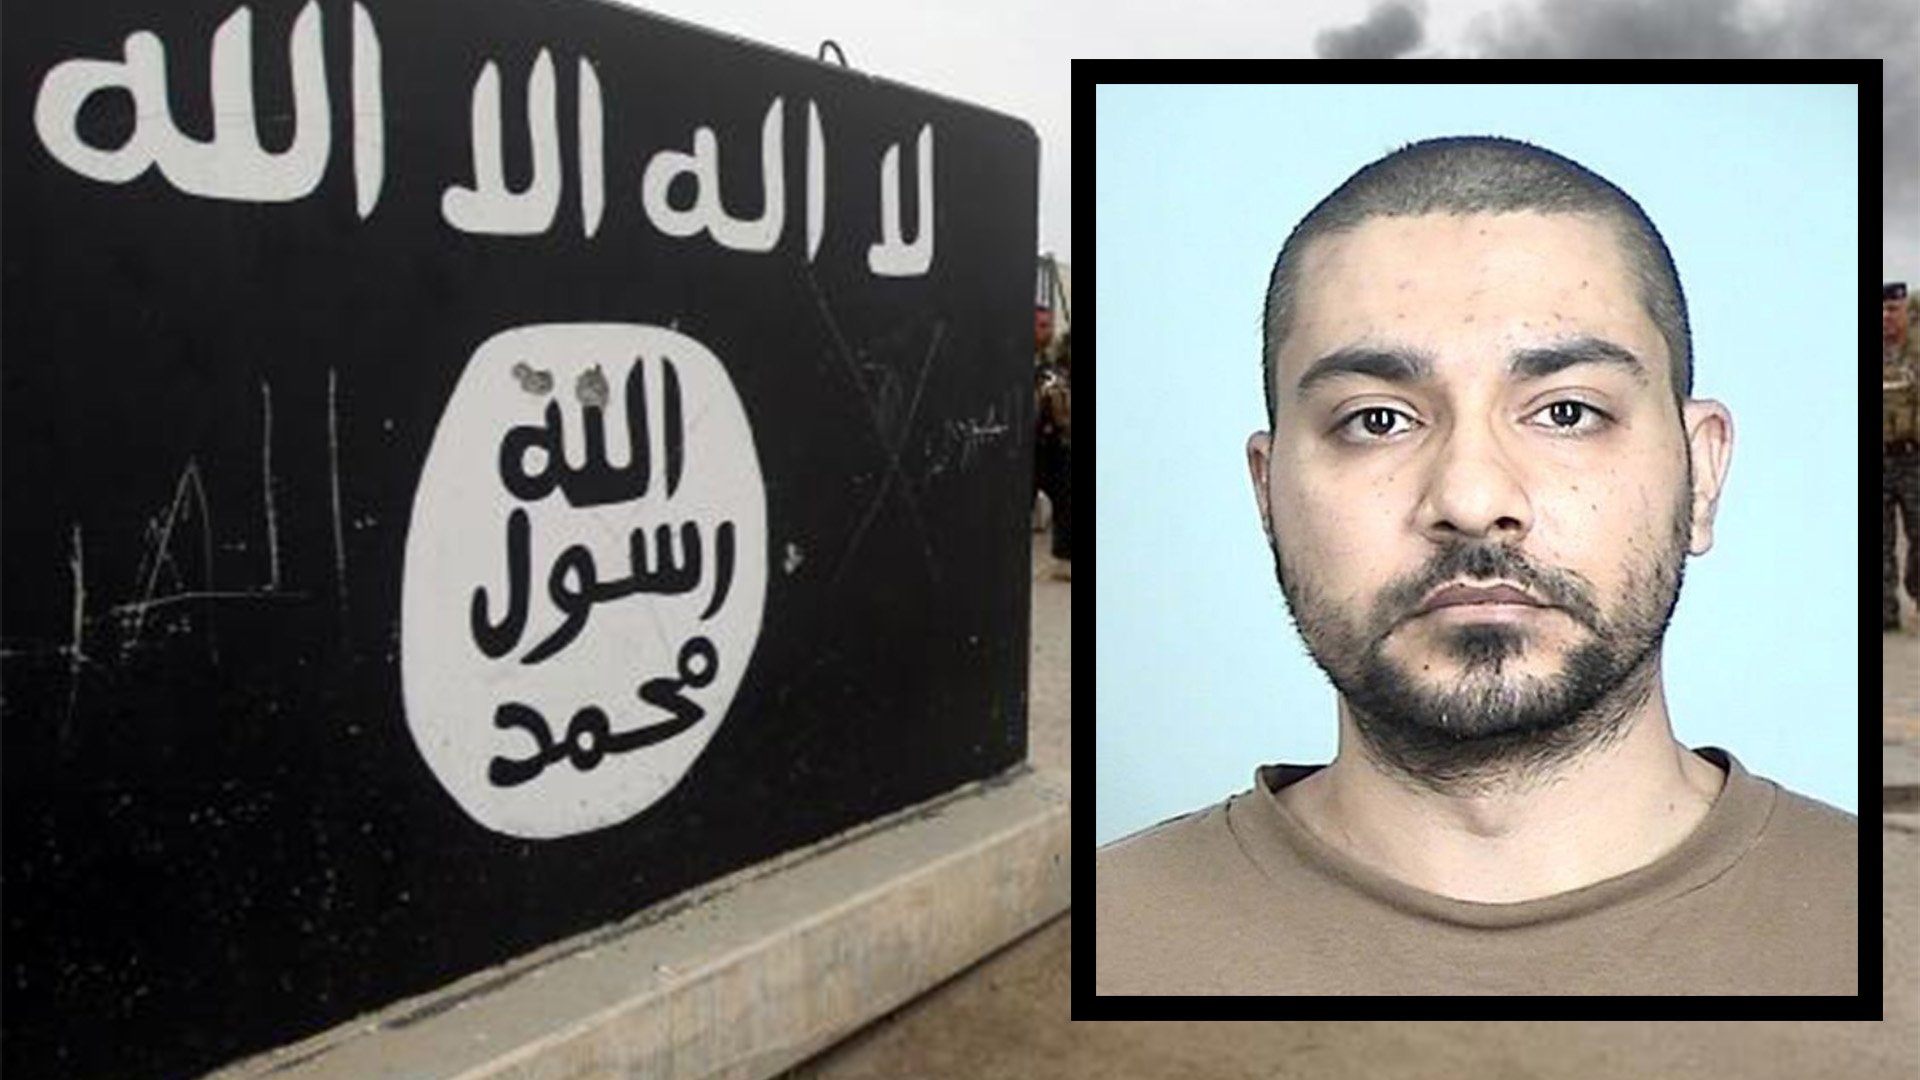 Muhammad Masood, 30, a licensed medical doctor in Pakistan and a research coordinator for the Mayo Clinic in Rochester, Minnesota, pleaded guilty on Aug. 16, 2022, to trying to provide material support to the Islamic State terrorist group. Coffee or Die Magazine composite.